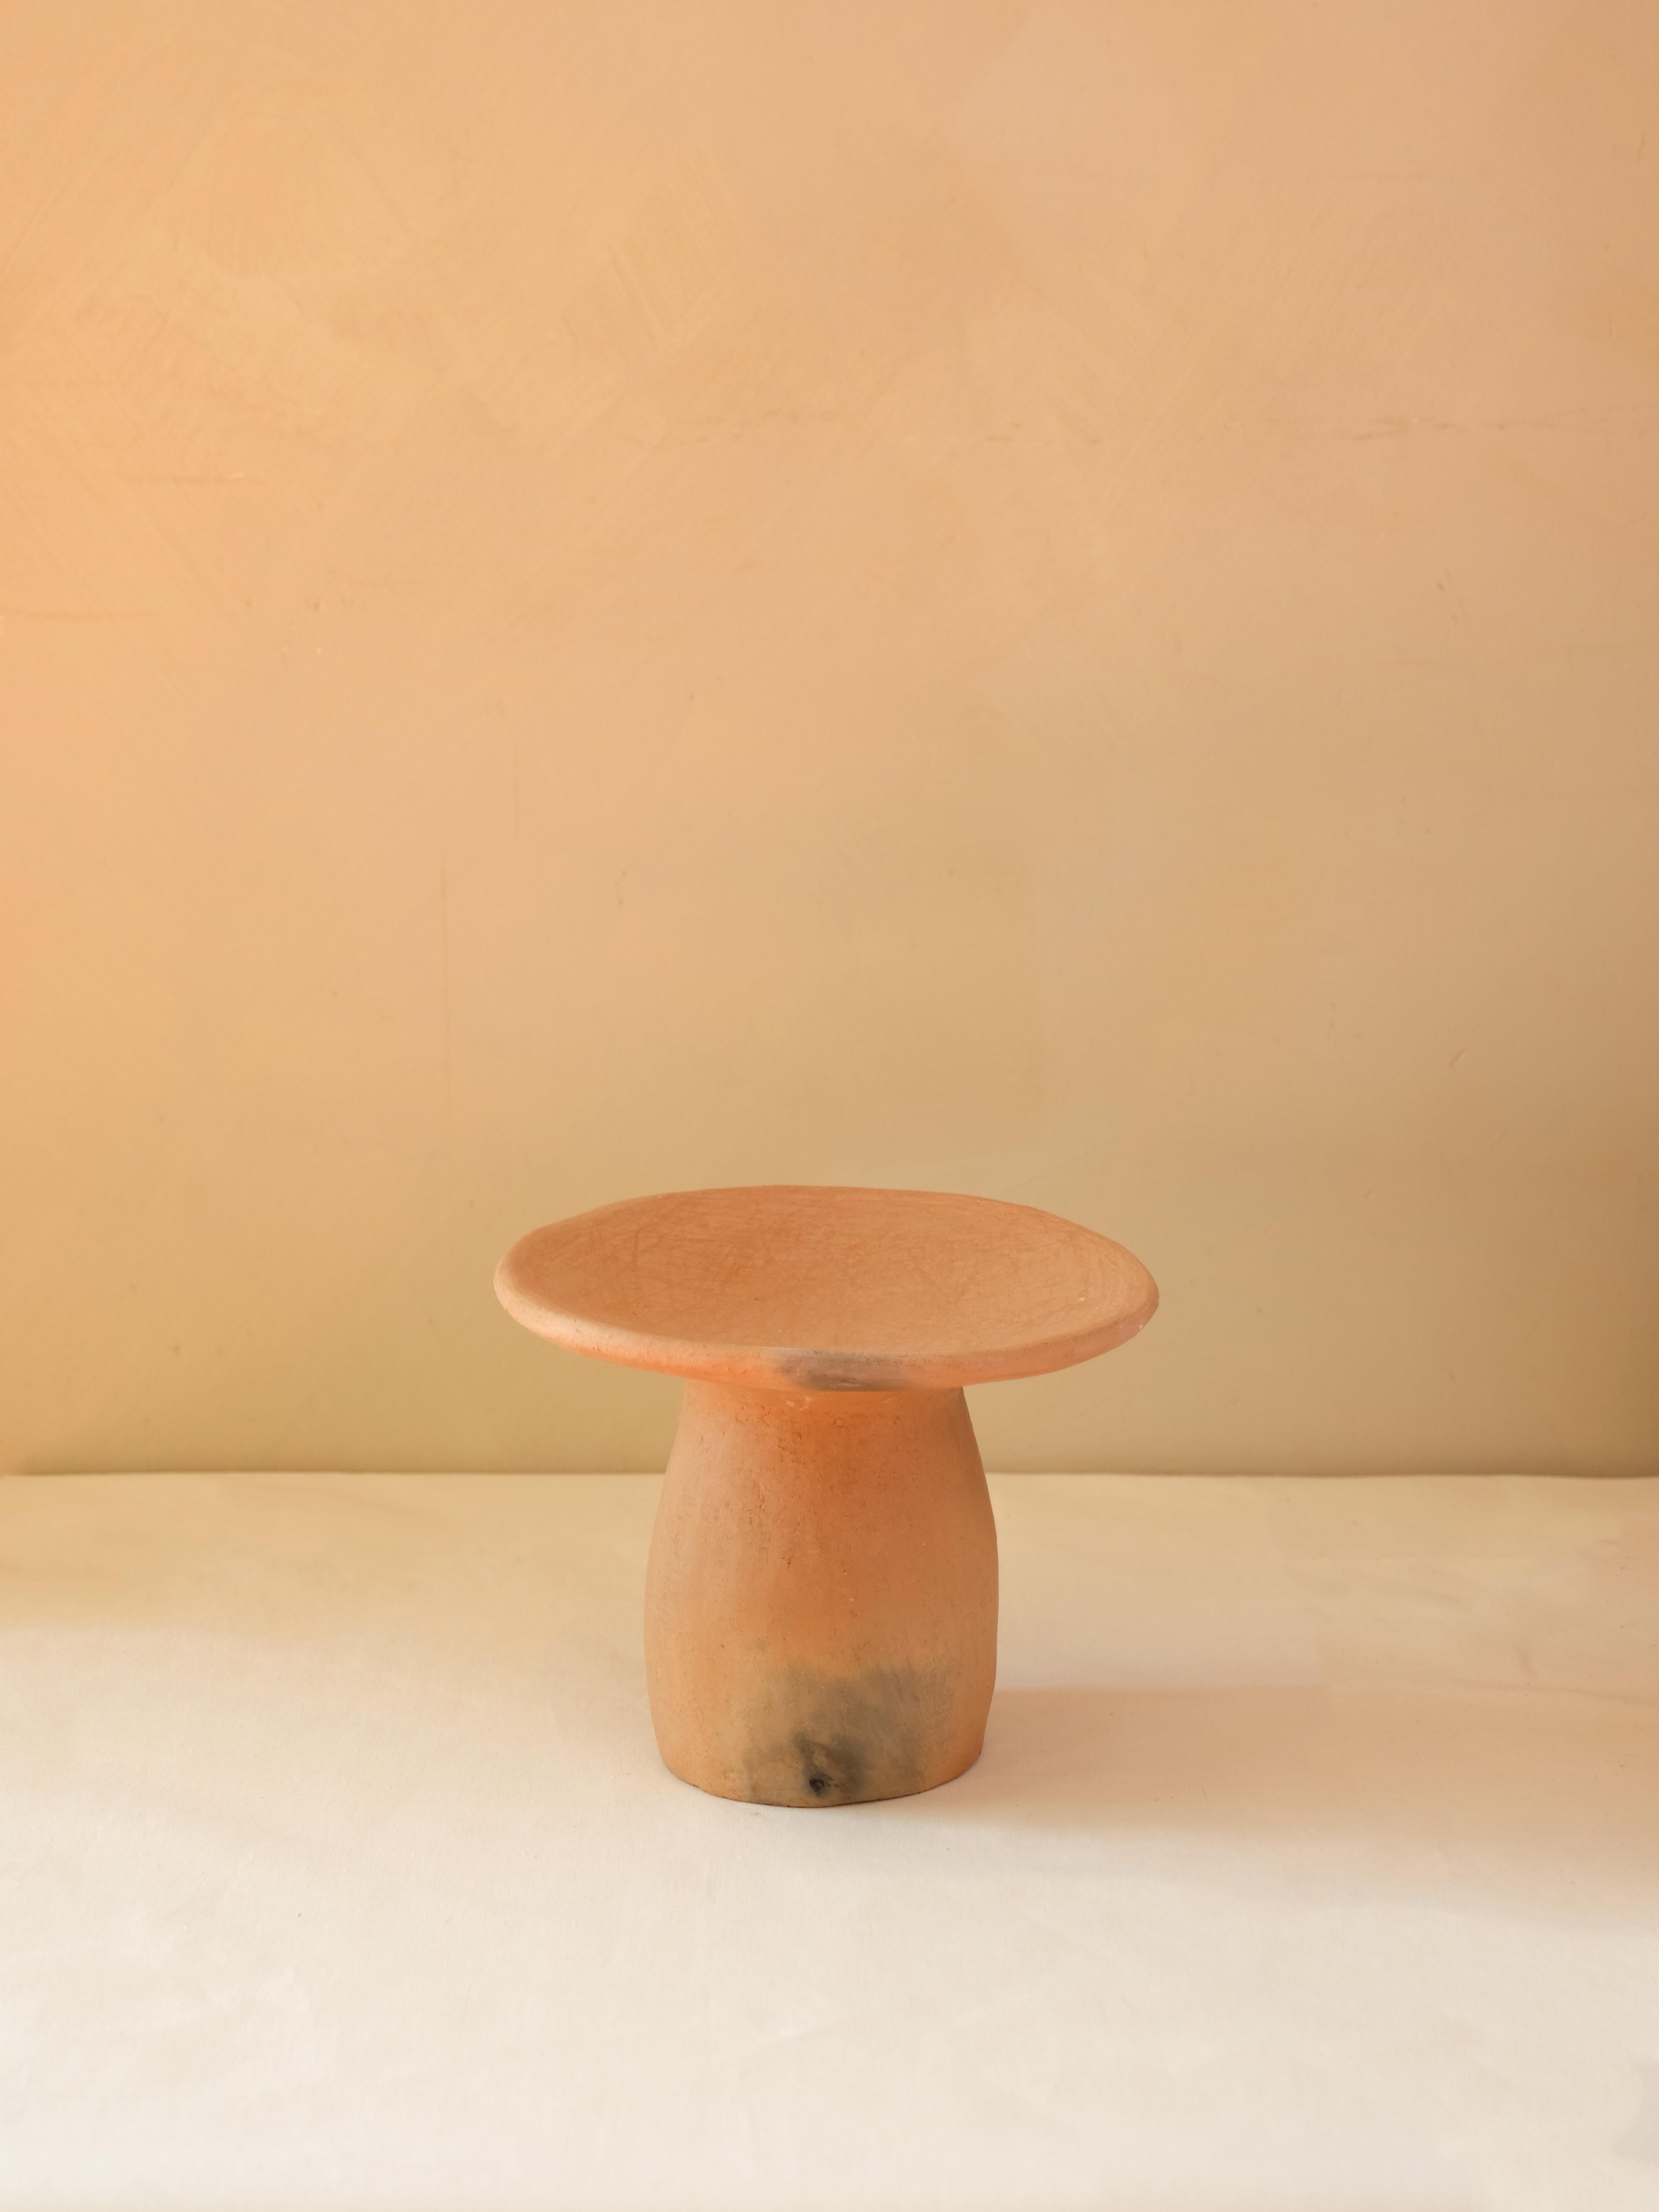 Terracotta contemporary Side Tables Made of local Clay, Handbuilt handfired For Sale 1